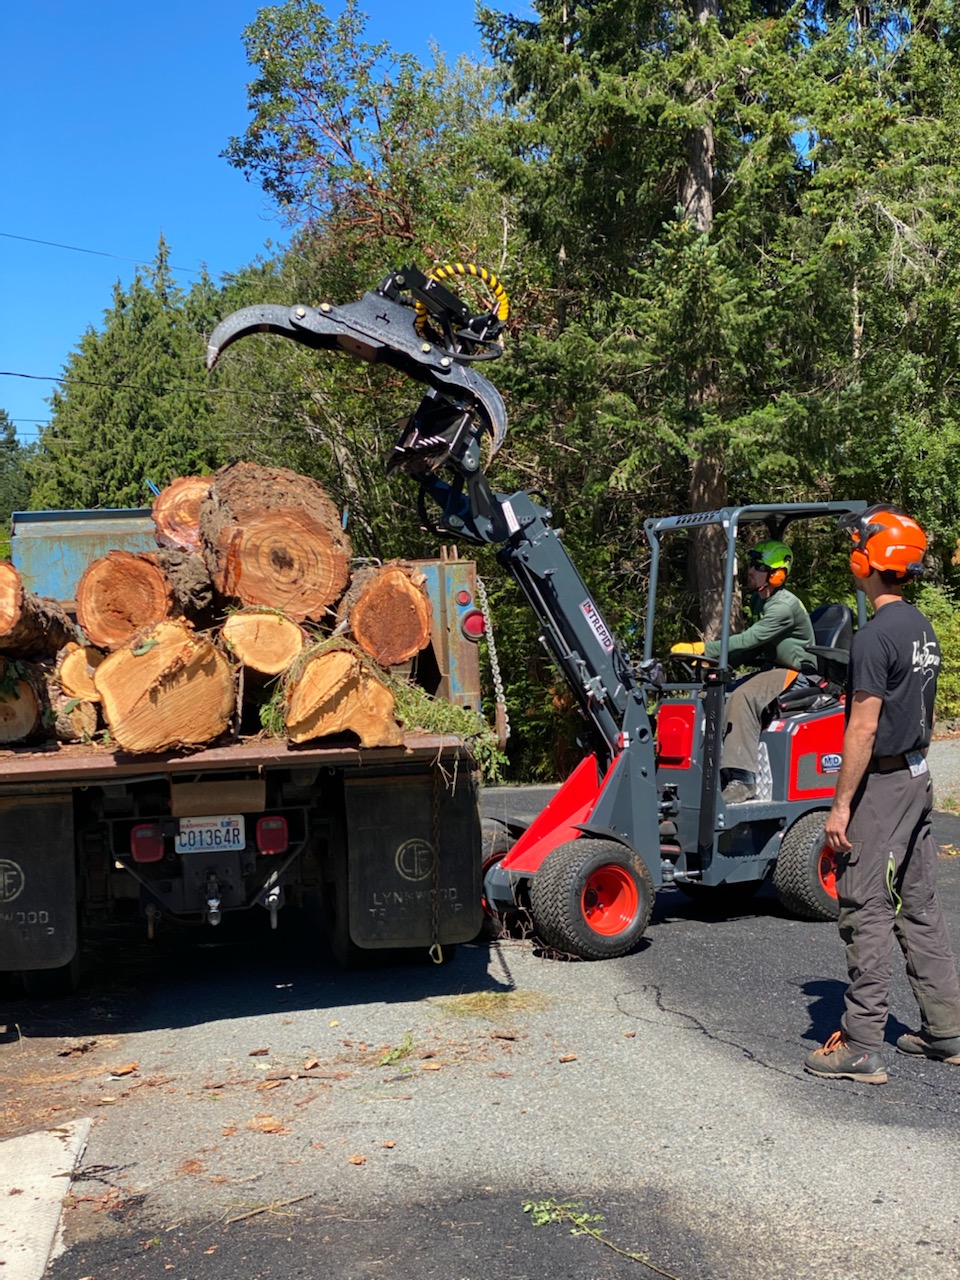 Articulating loader used to load logs by arborists